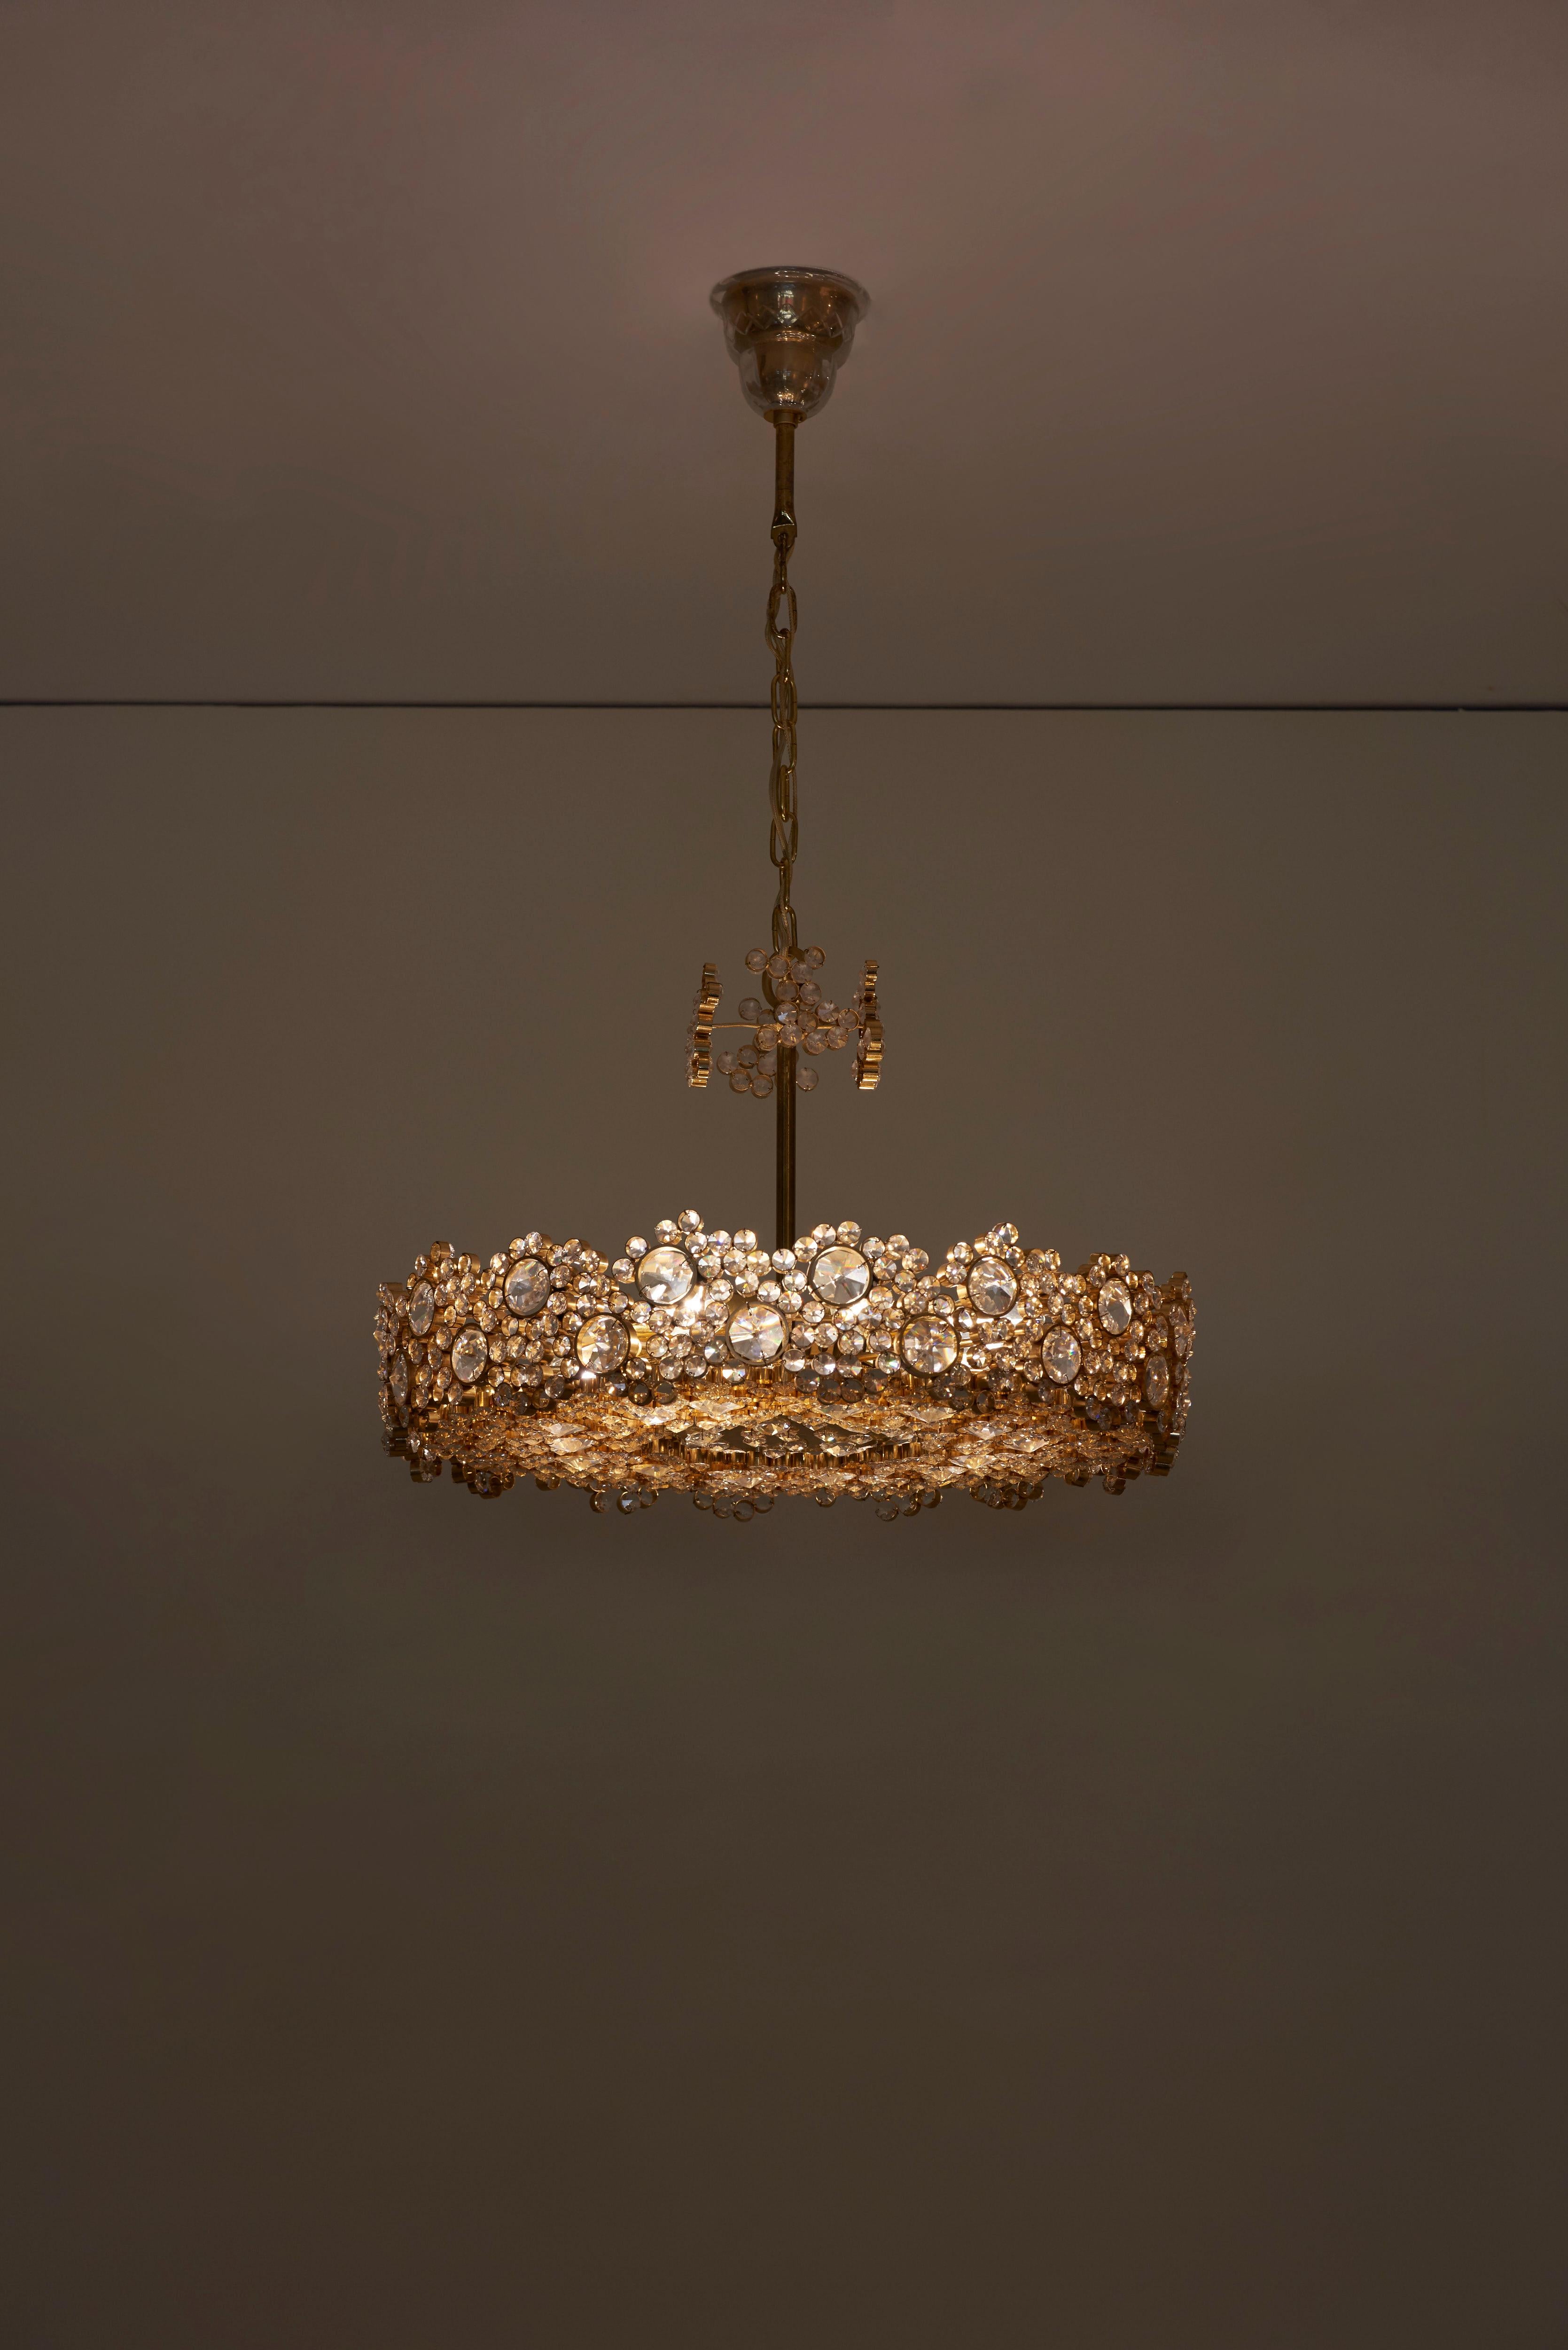 One of seven outstanding Palwa chandeliers from the 1960s, model S101. The 24-carat gold-plated brass frames are encrusted with hundreds of high quality diamond like crystals. The chandeliers are handmade and in excellent condition and float every